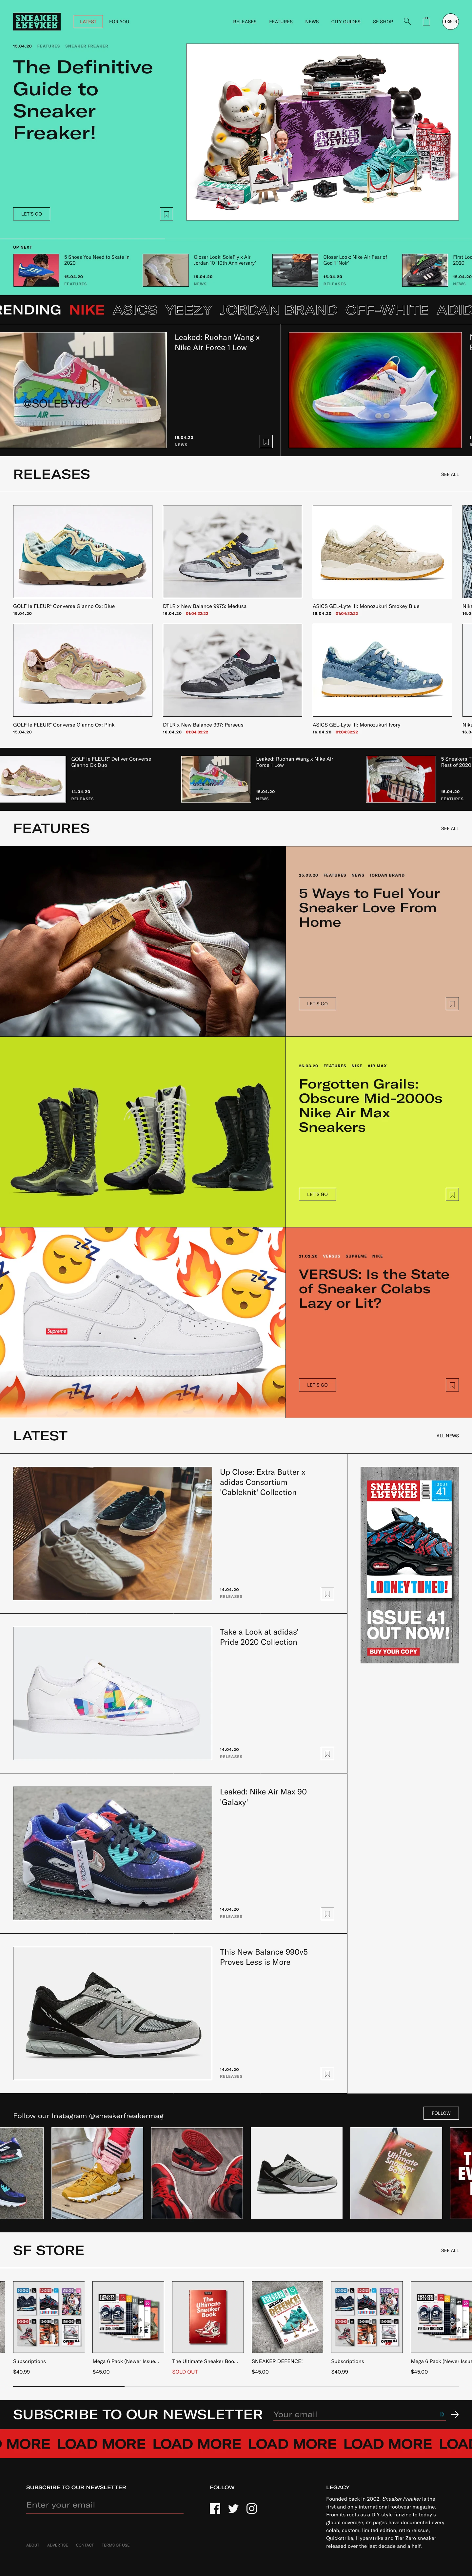 Sneaker Freaker Landing Page Example: Since 2002, Sneaker Freaker has created a legacy as the first and only international footwear magazine and the definitive resource for knowledge. Every brand